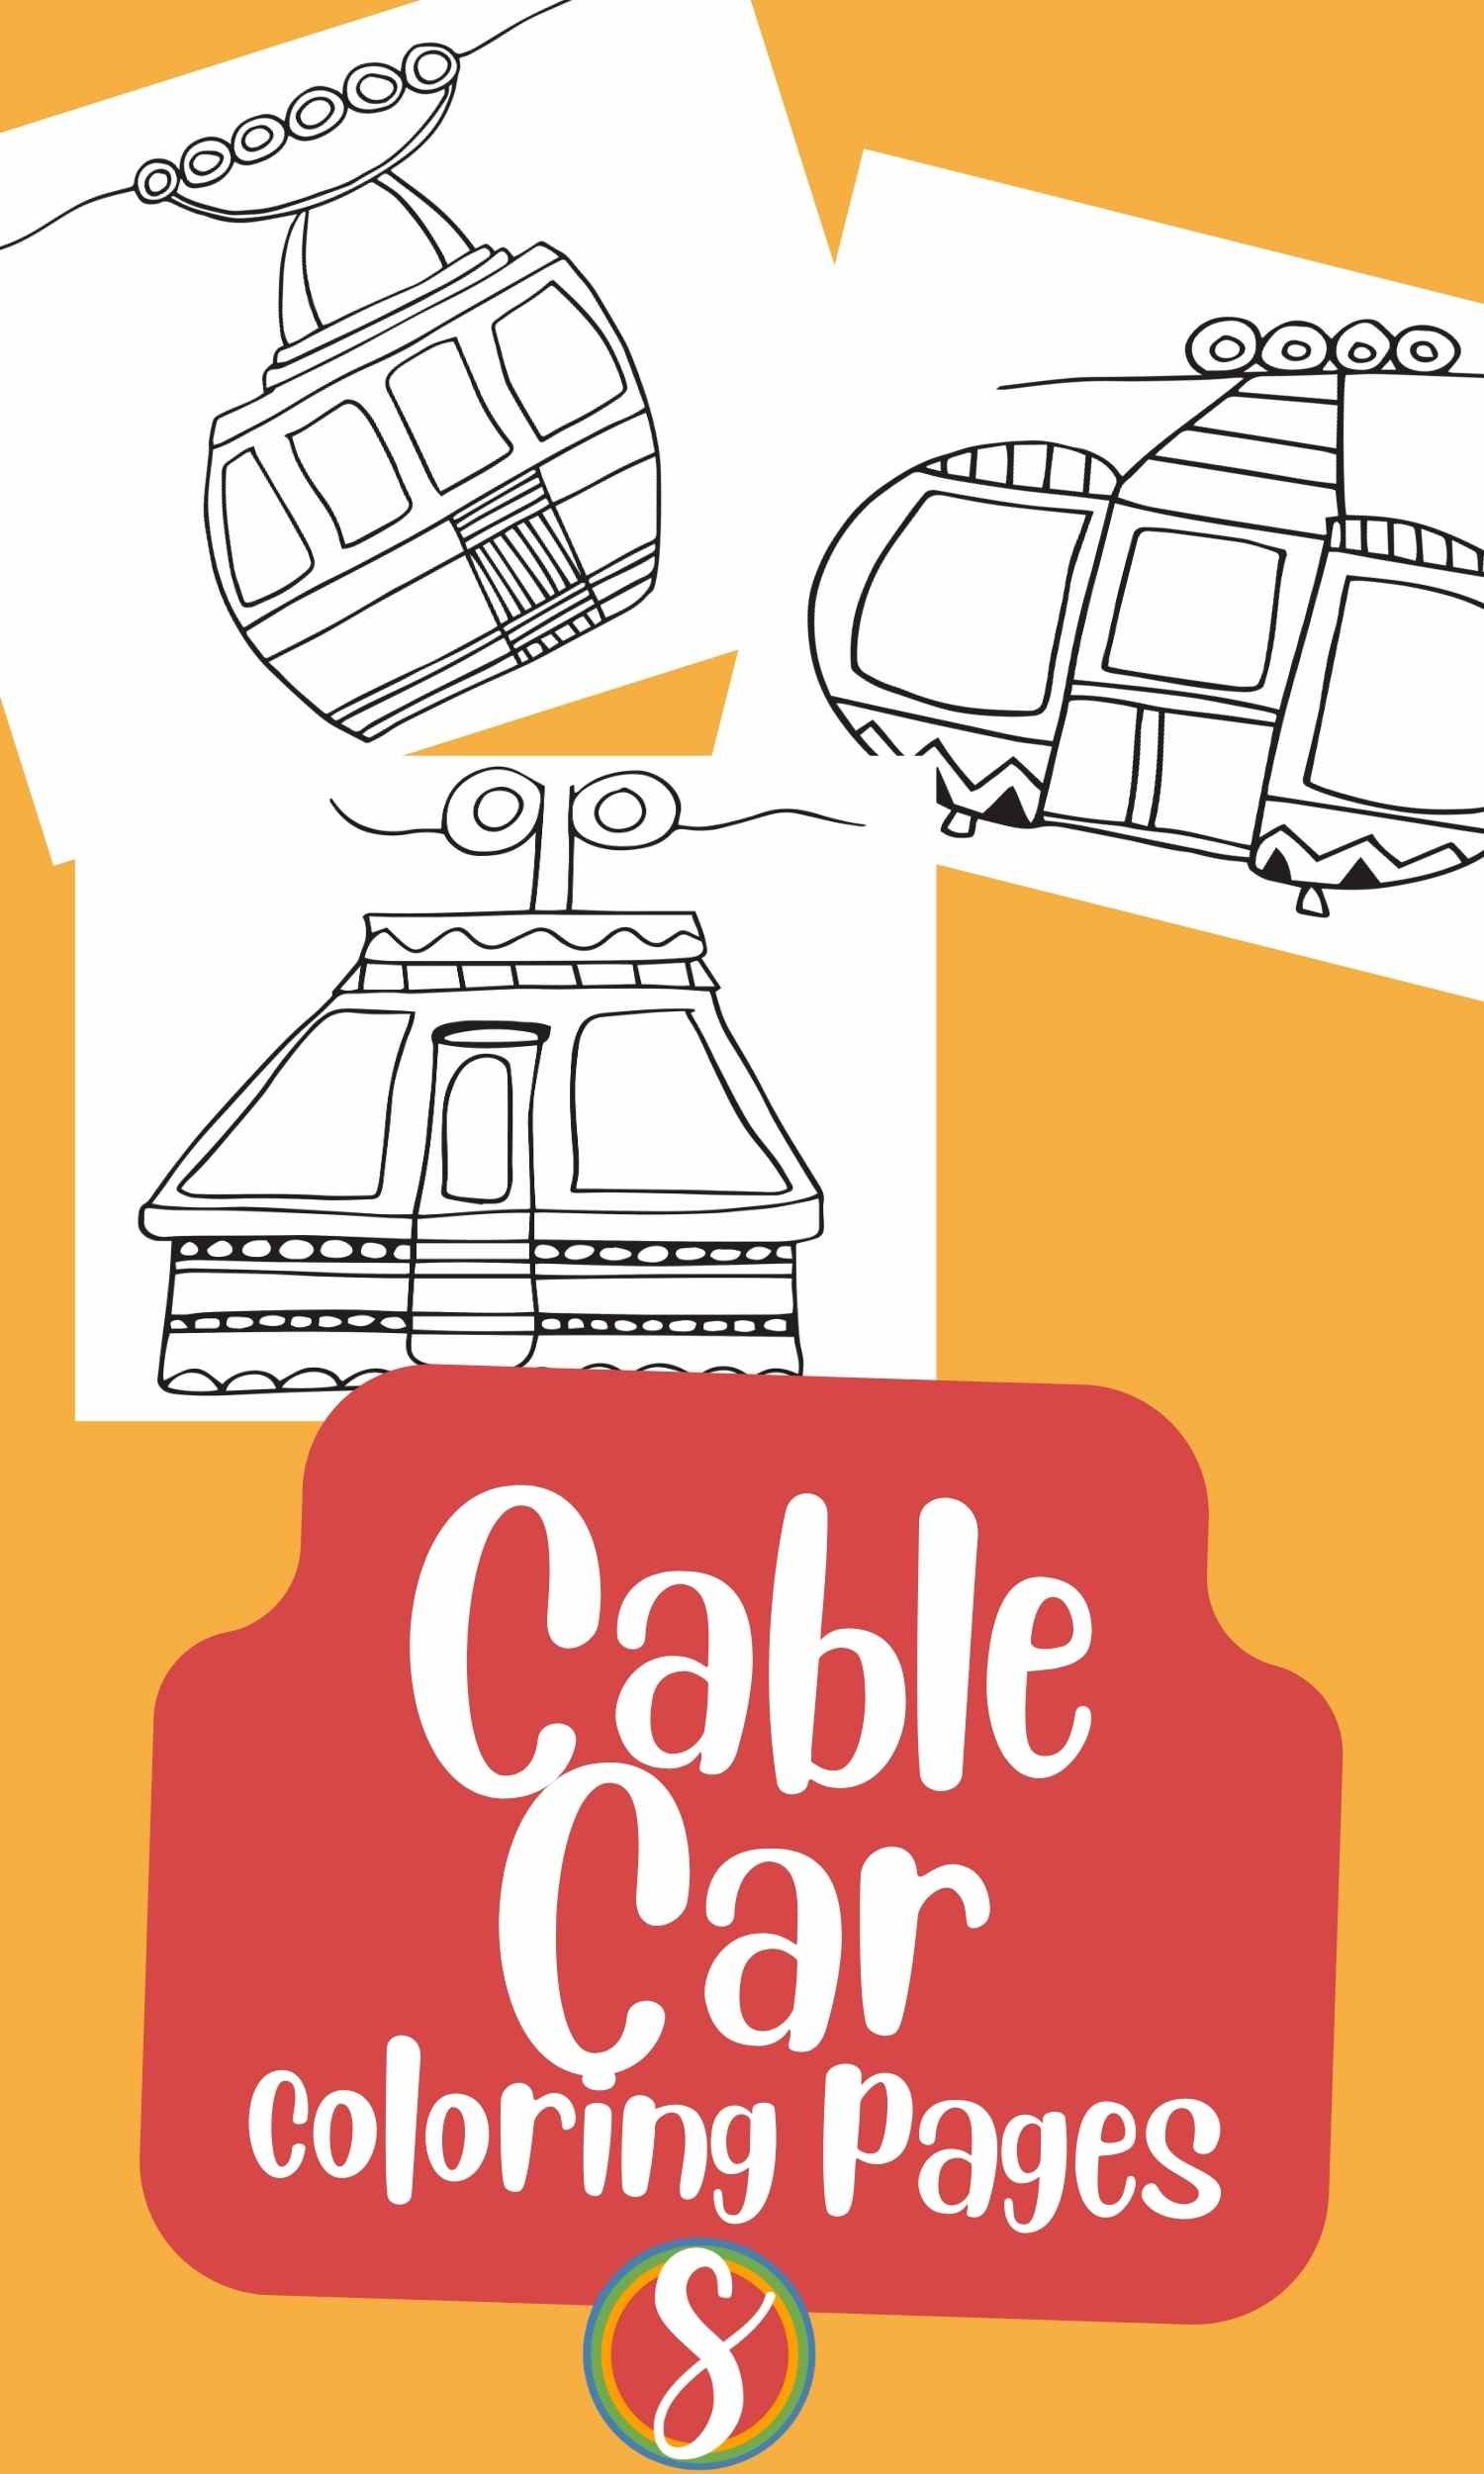 3 cable car coloring pages, each a simple cable car drawing